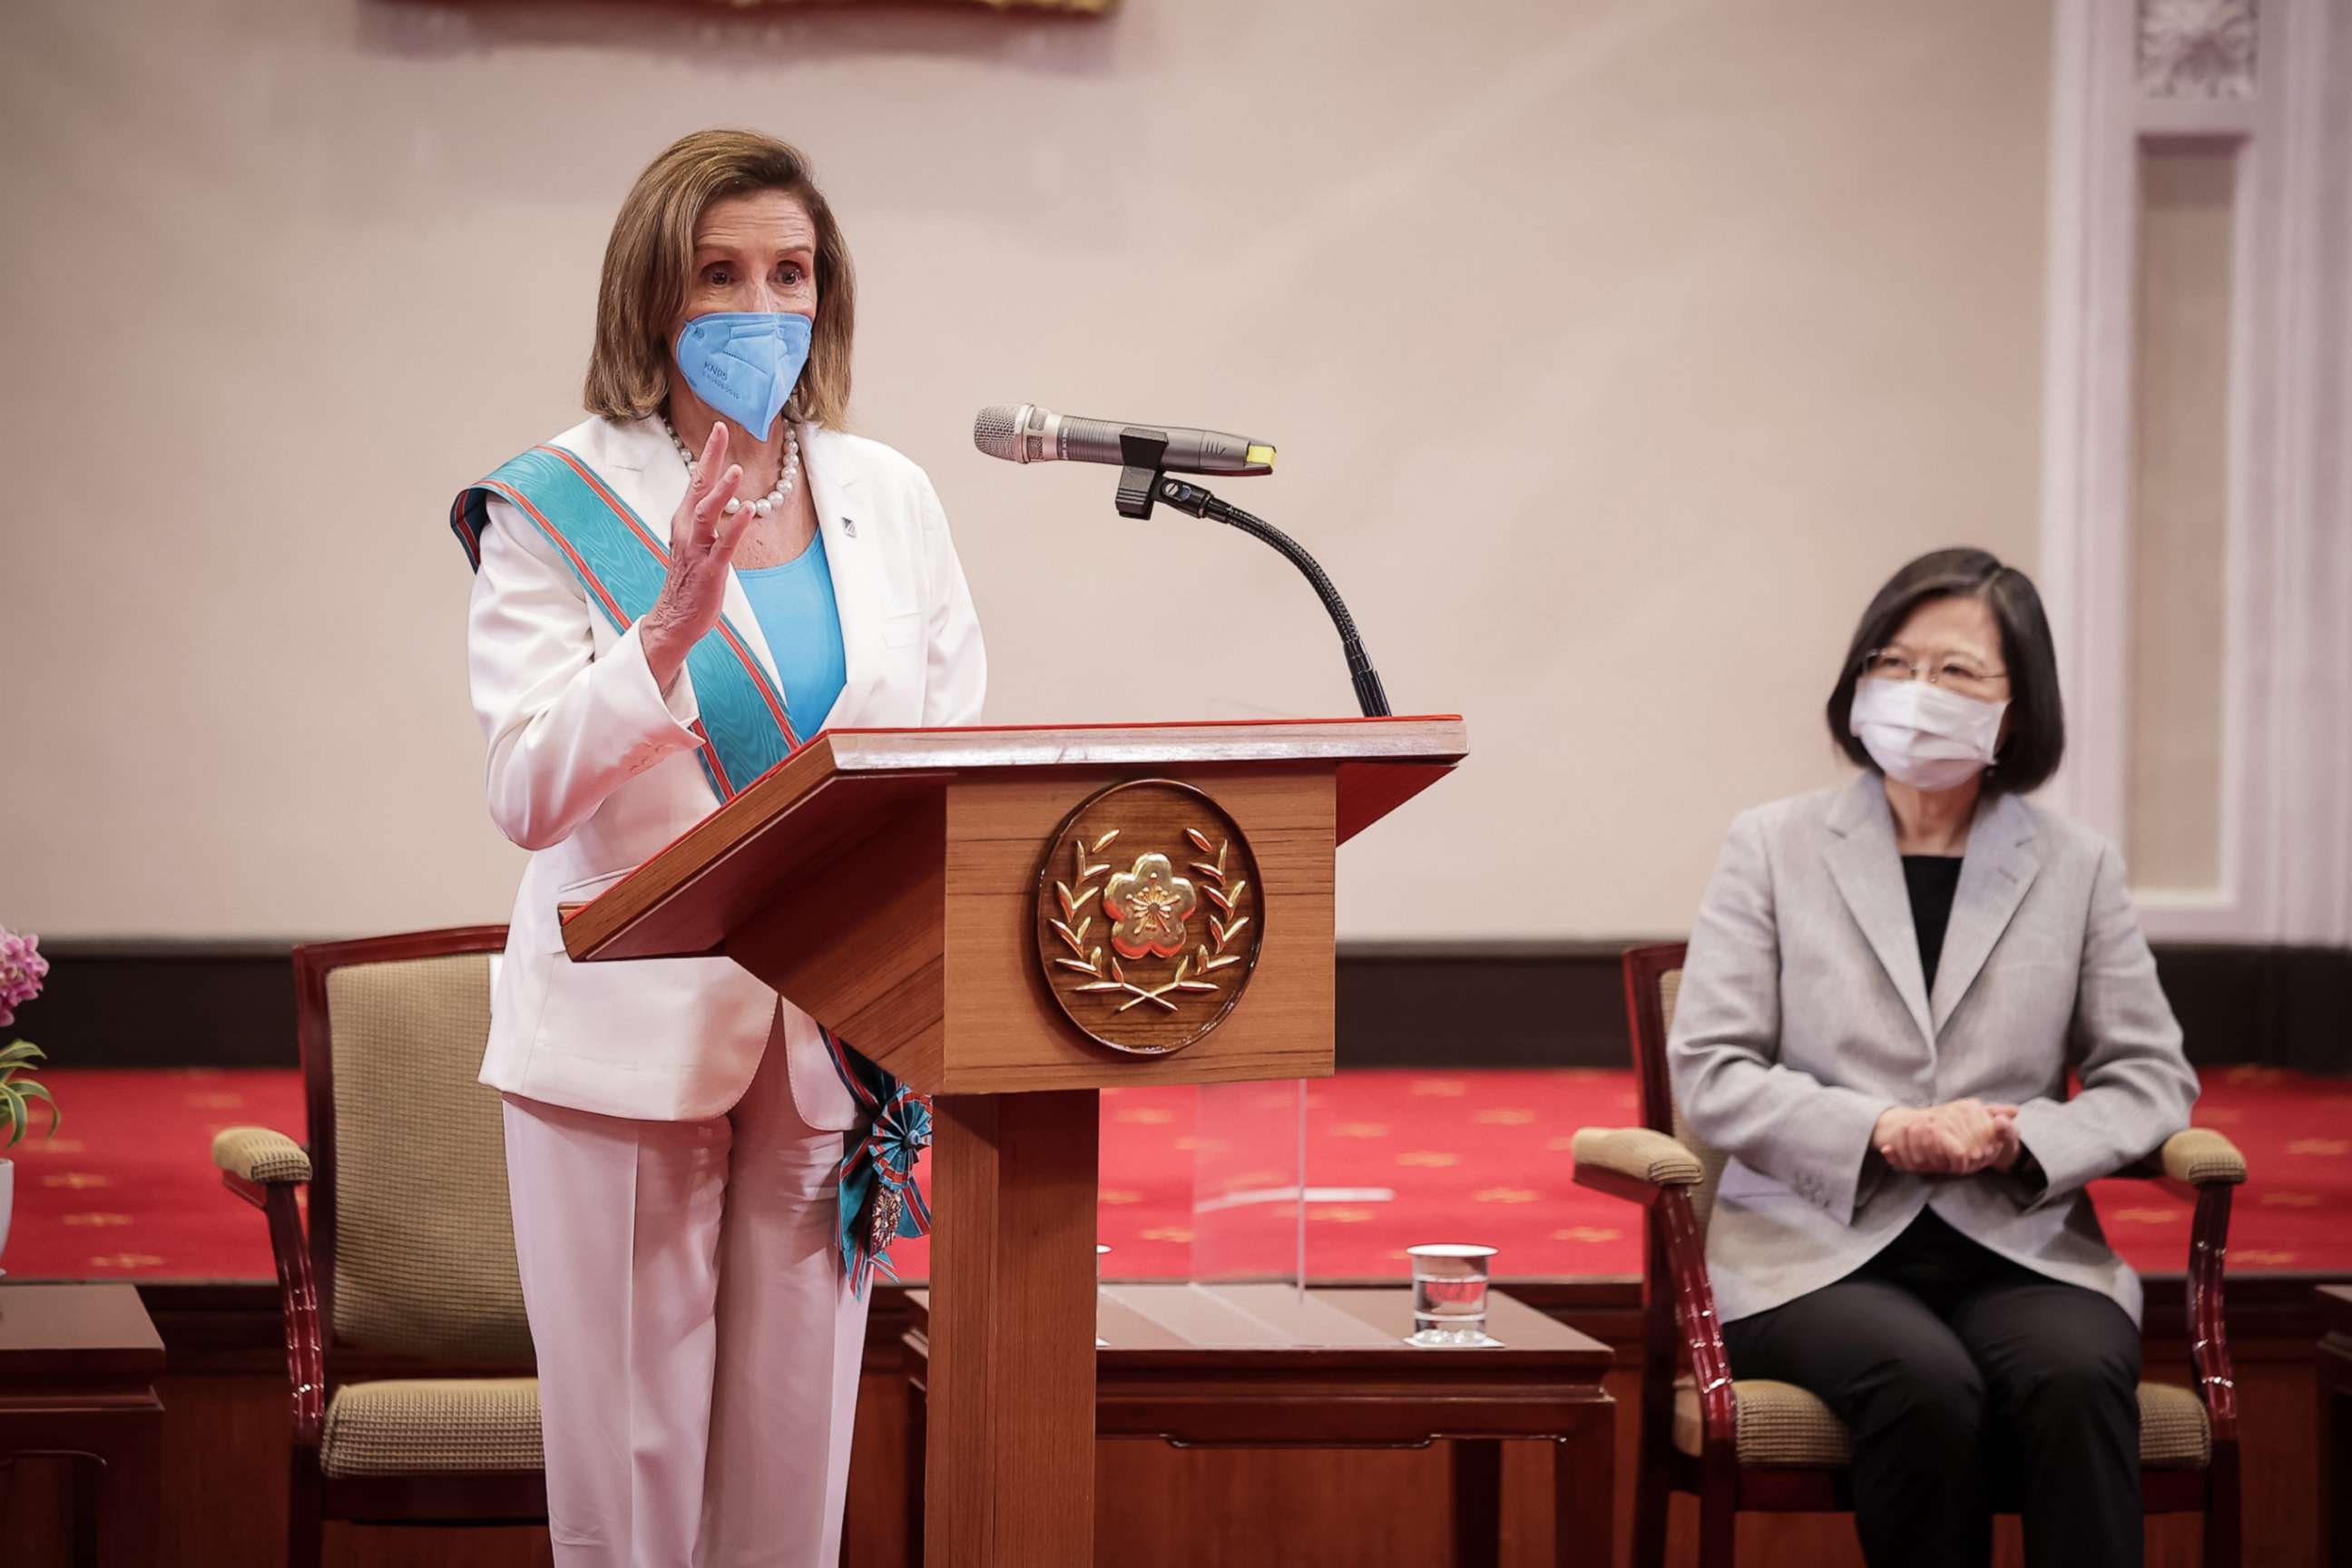 PHOTO: Nancy Pelosi left, speaks after receiving the Order of Propitious Clouds with Special Grand Cordon, Taiwan's highest civilian honor, from Taiwan's President Tsai Ing-wen, right, at the president's office on Aug. 3, 2022 in Taipei, Taiwan.